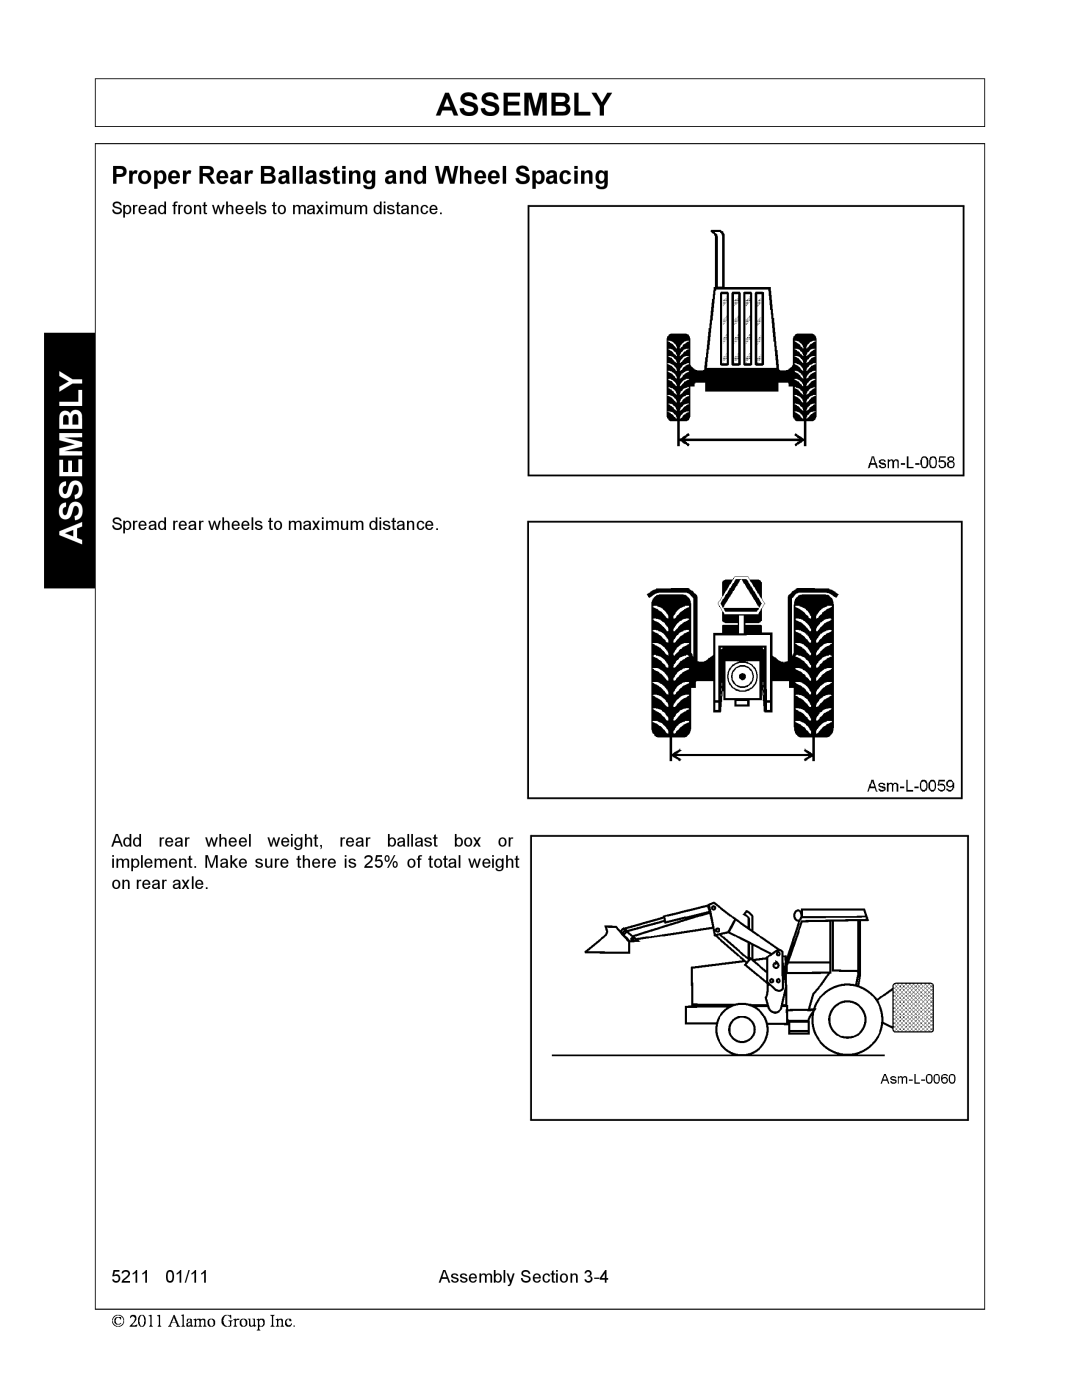 Servis-Rhino 5211 manual Assembly, Proper Rear Ballasting and Wheel Spacing 